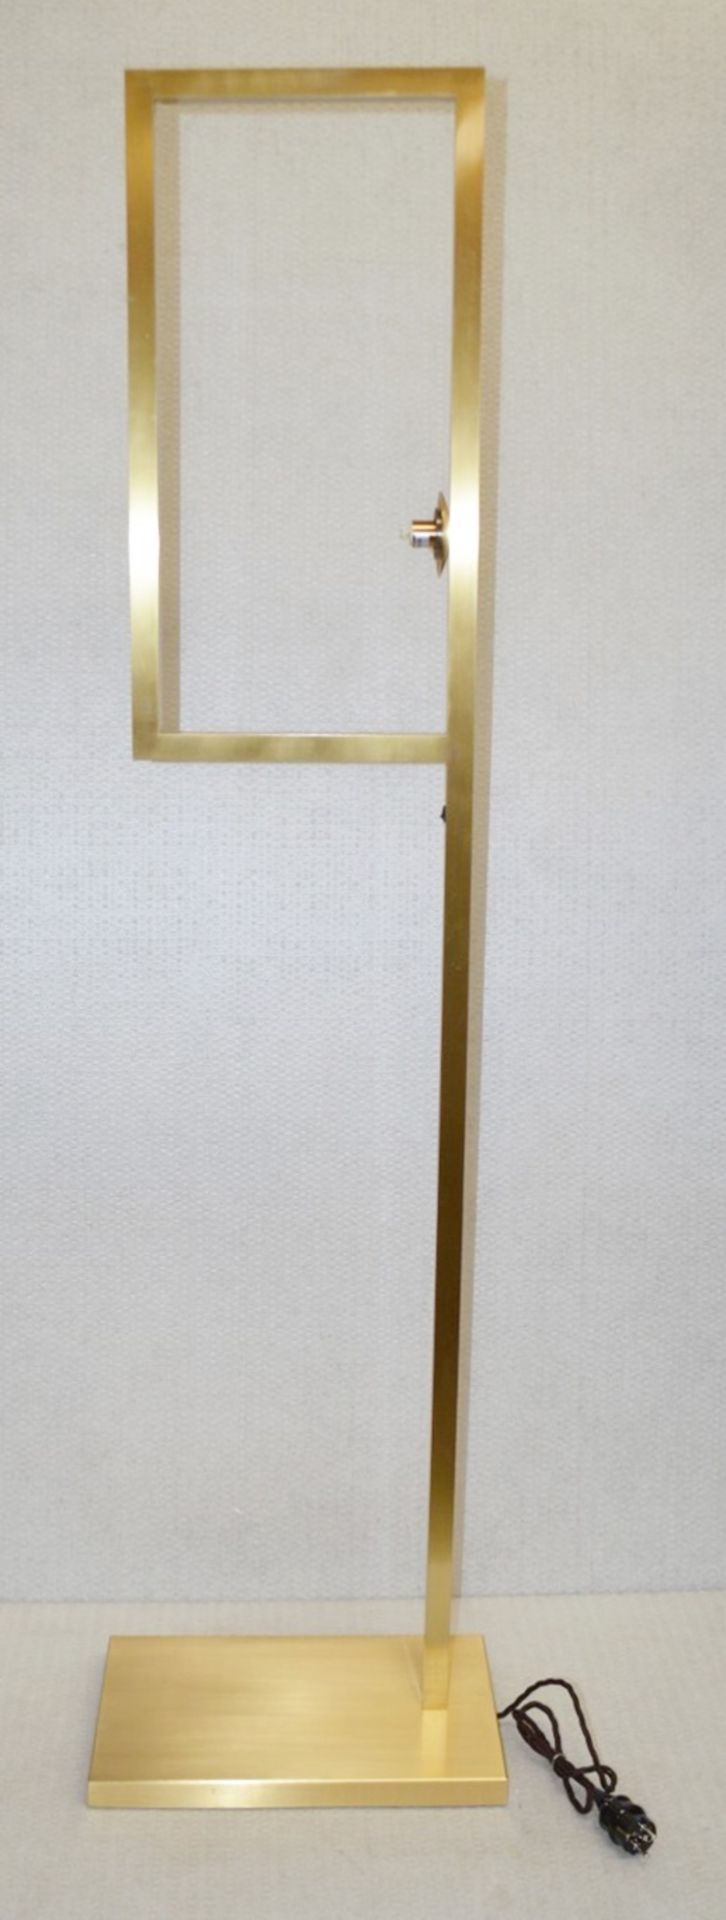 1 x CHELSOM Freestanding Floor Lamp In A Brushed Brass Finish - Unused Boxed Stock - Dimensions: